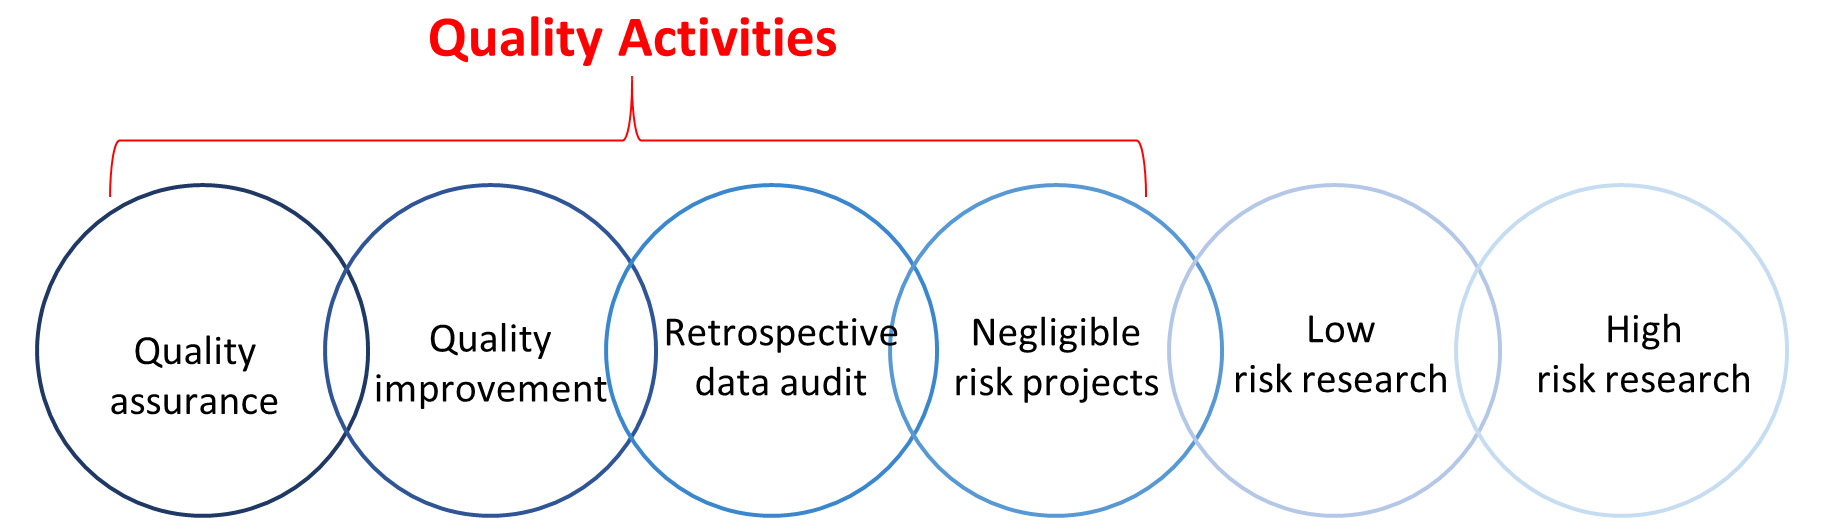 Continuum of research activities